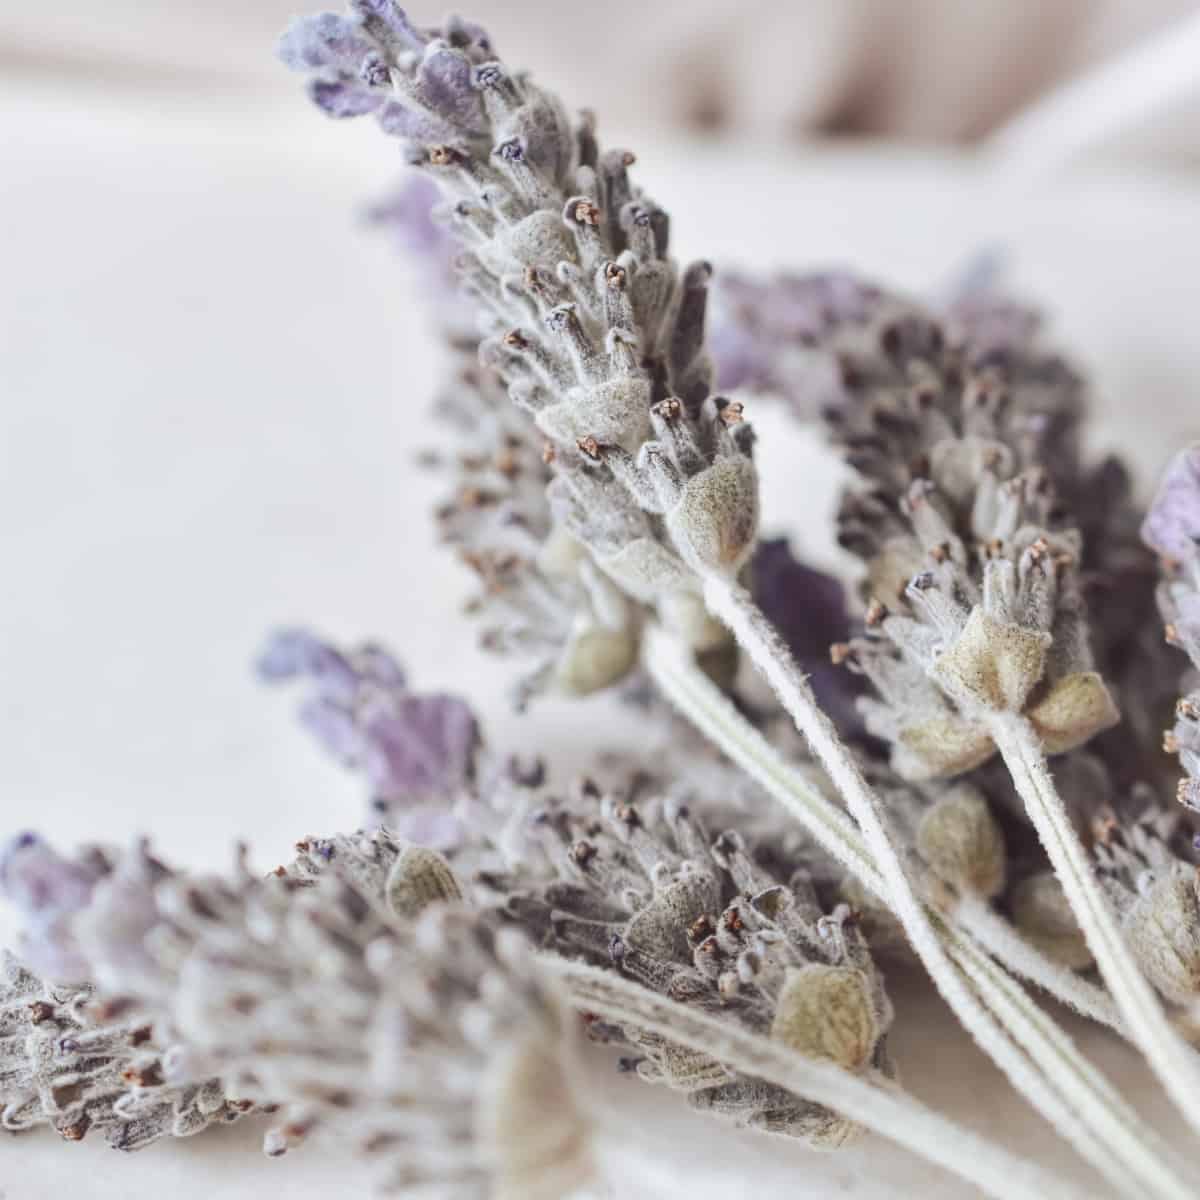 Dried lavender flowers resting in a pile.